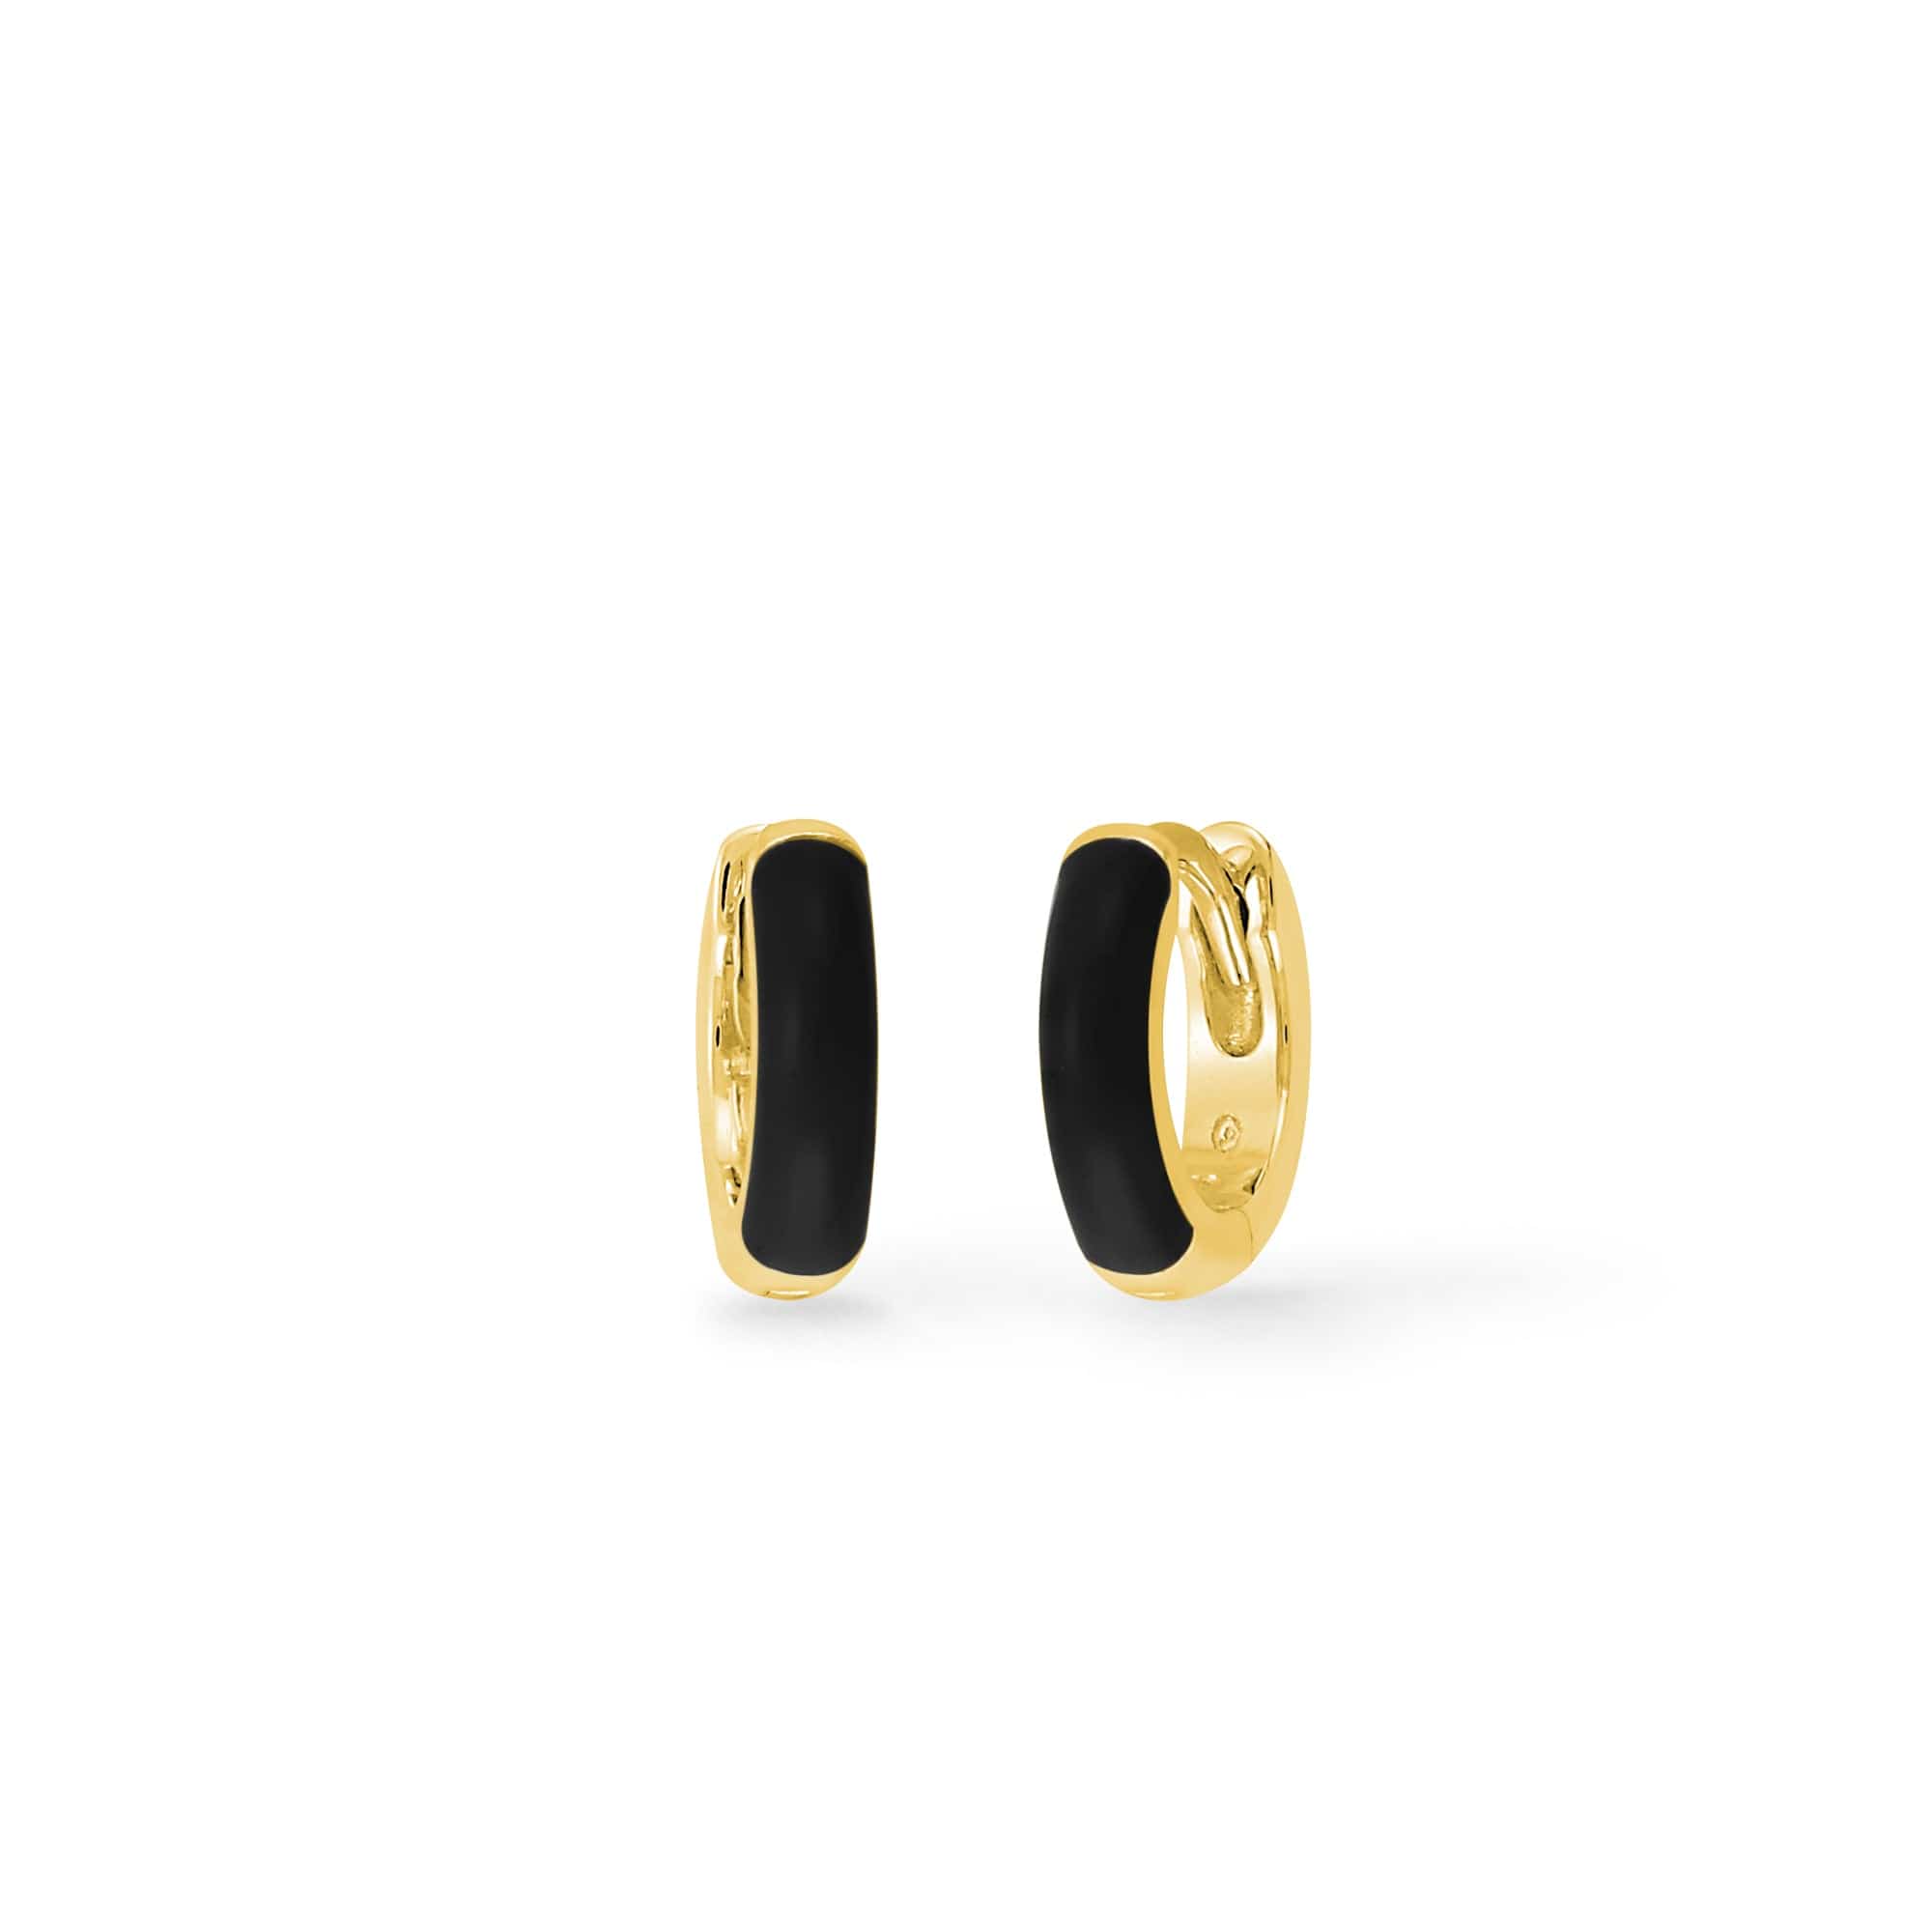 Boma Jewelry Earrings Black / 14k Gold Plated Mini Huggie Hoops with Color